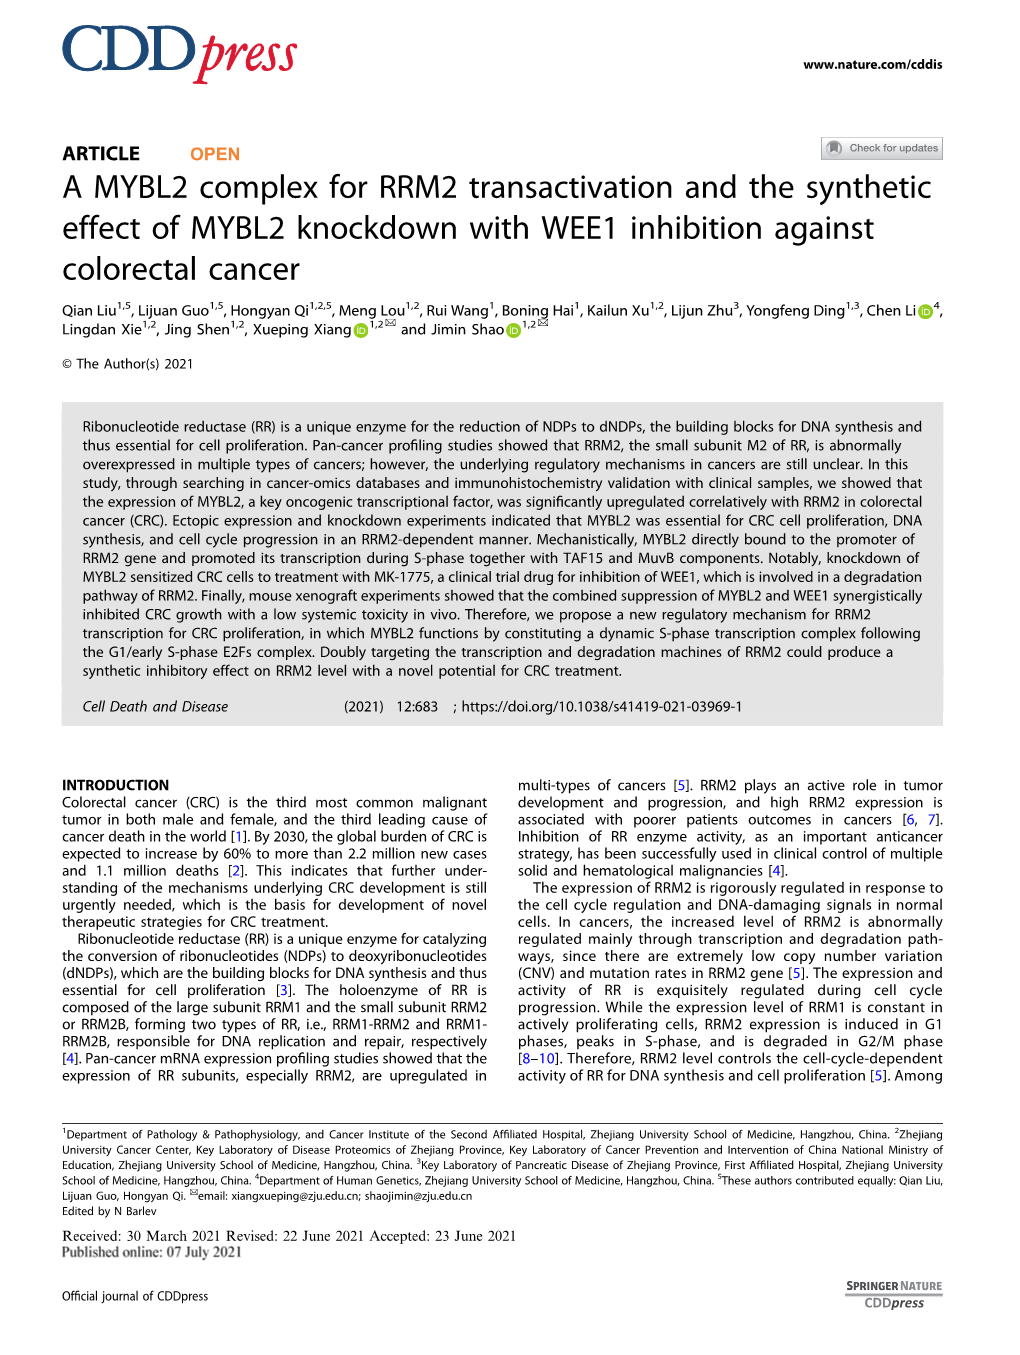 A MYBL2 Complex for RRM2 Transactivation and the Synthetic Effect of MYBL2 Knockdown with WEE1 Inhibition Against Colorectal Cancer